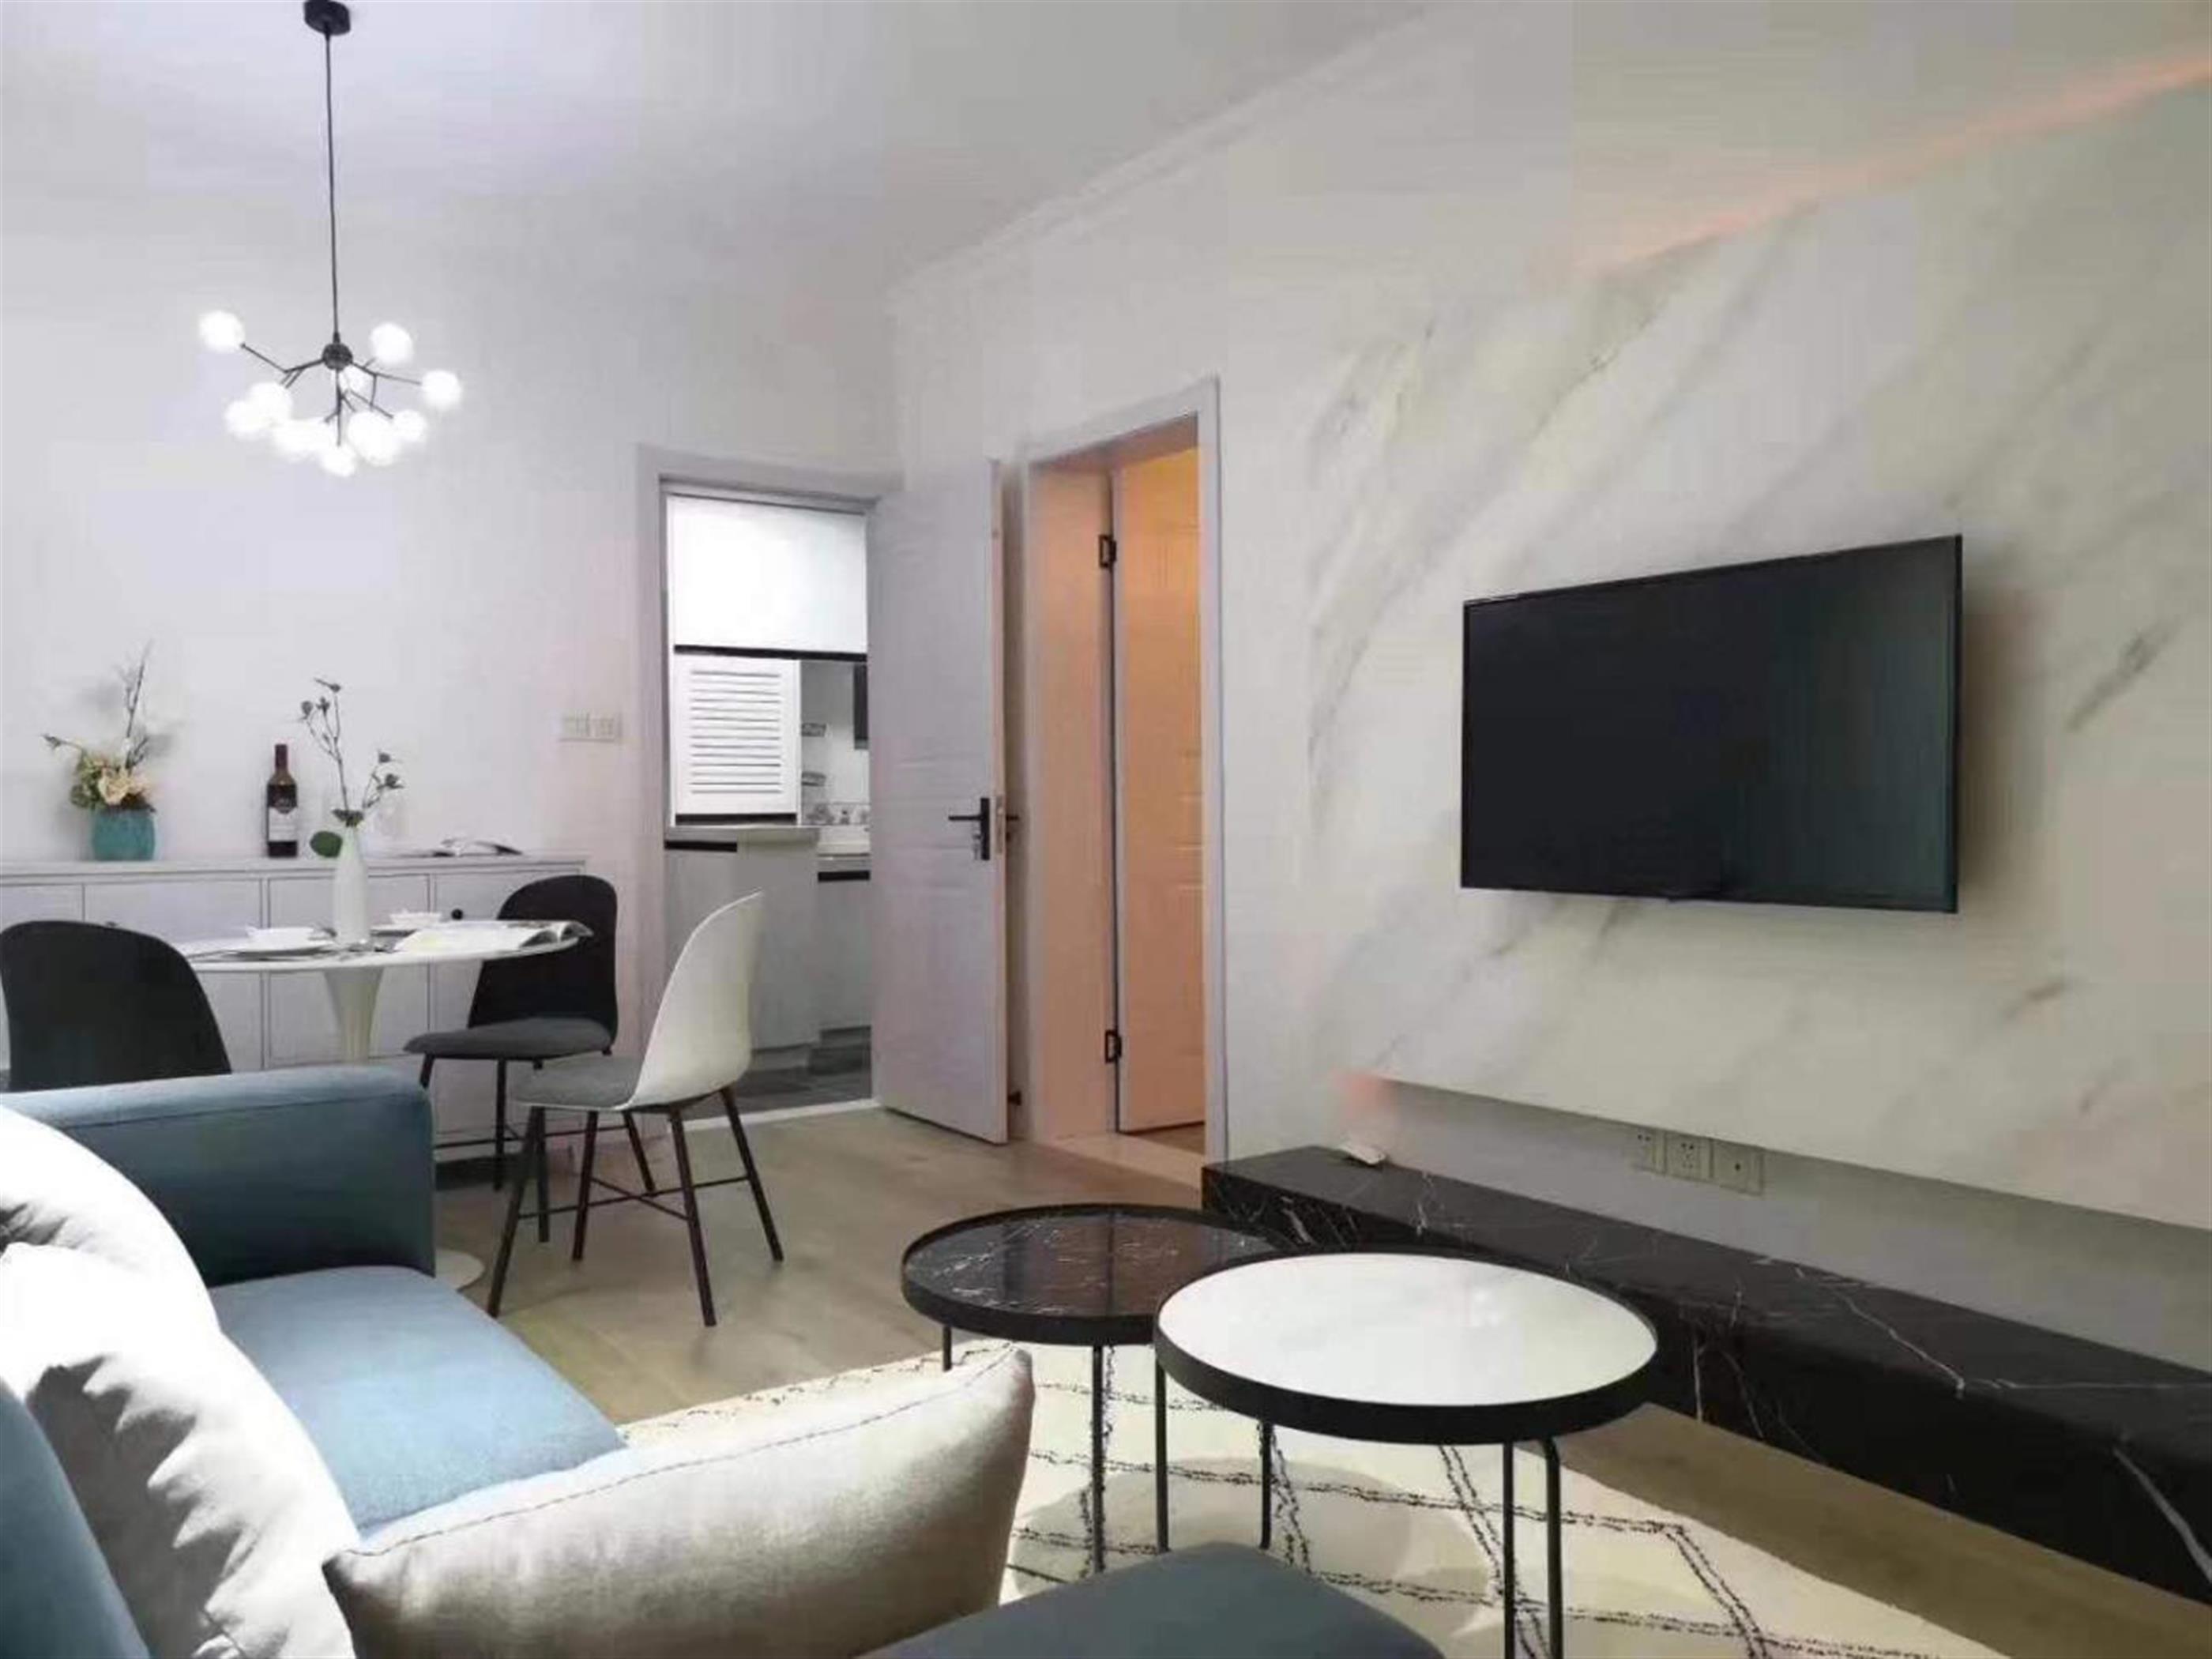 nice decor Renovated Bright 1BR FFC Walk-up Apt Nr LN 1/10/12 for Rent in Shanghai